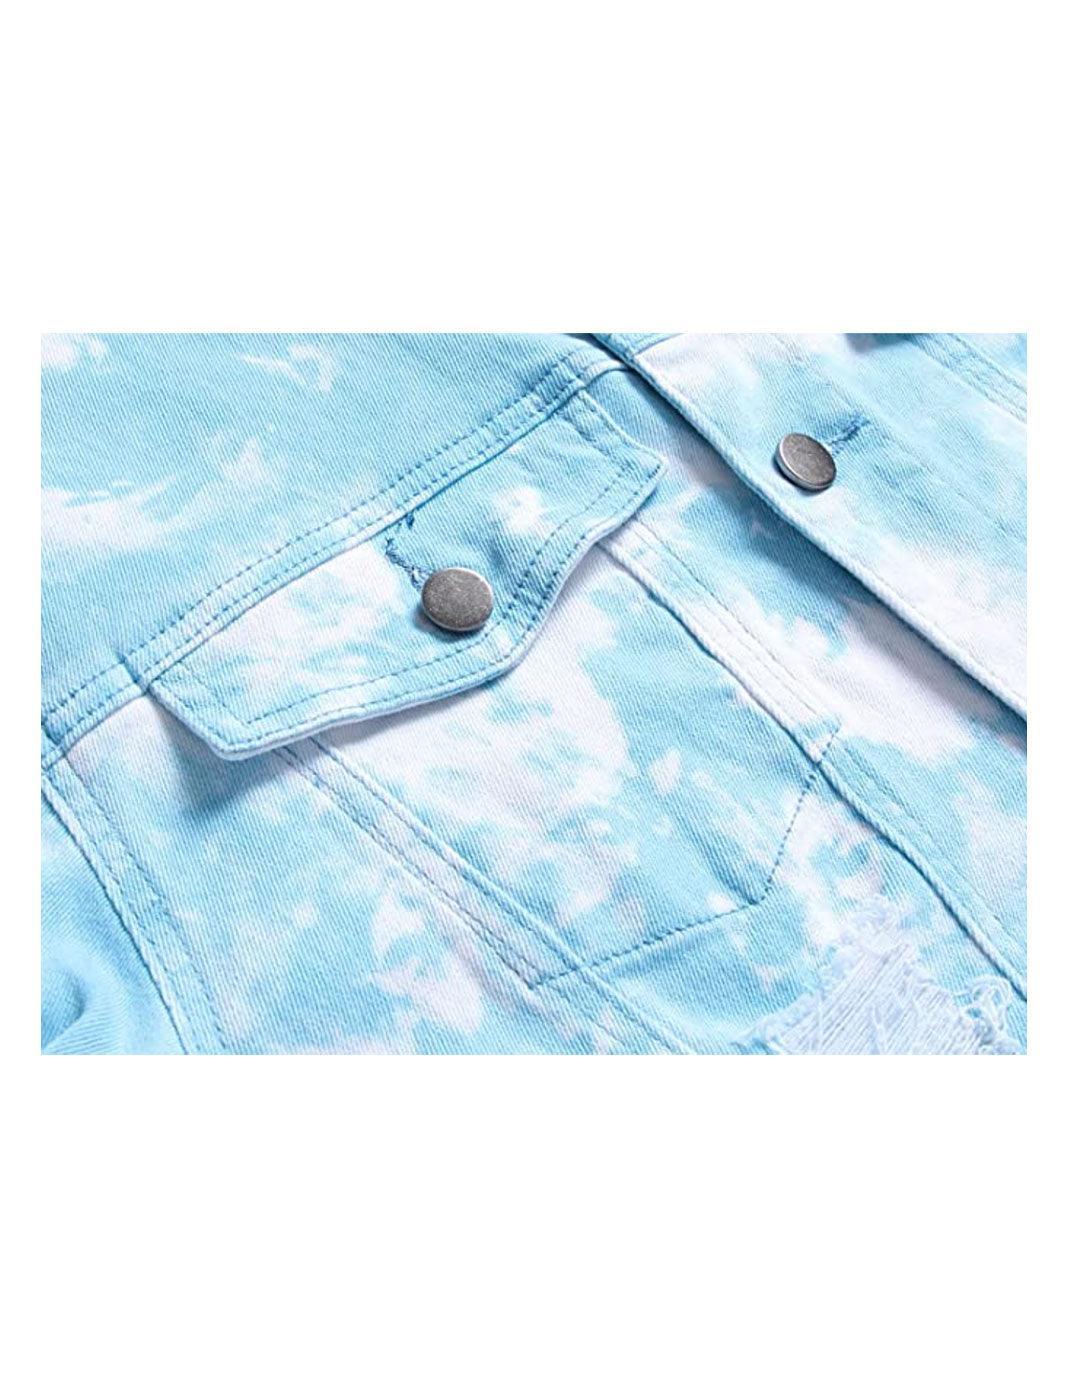 Cloudy Blue Denim Washed Jacket - Constantly Create Shop